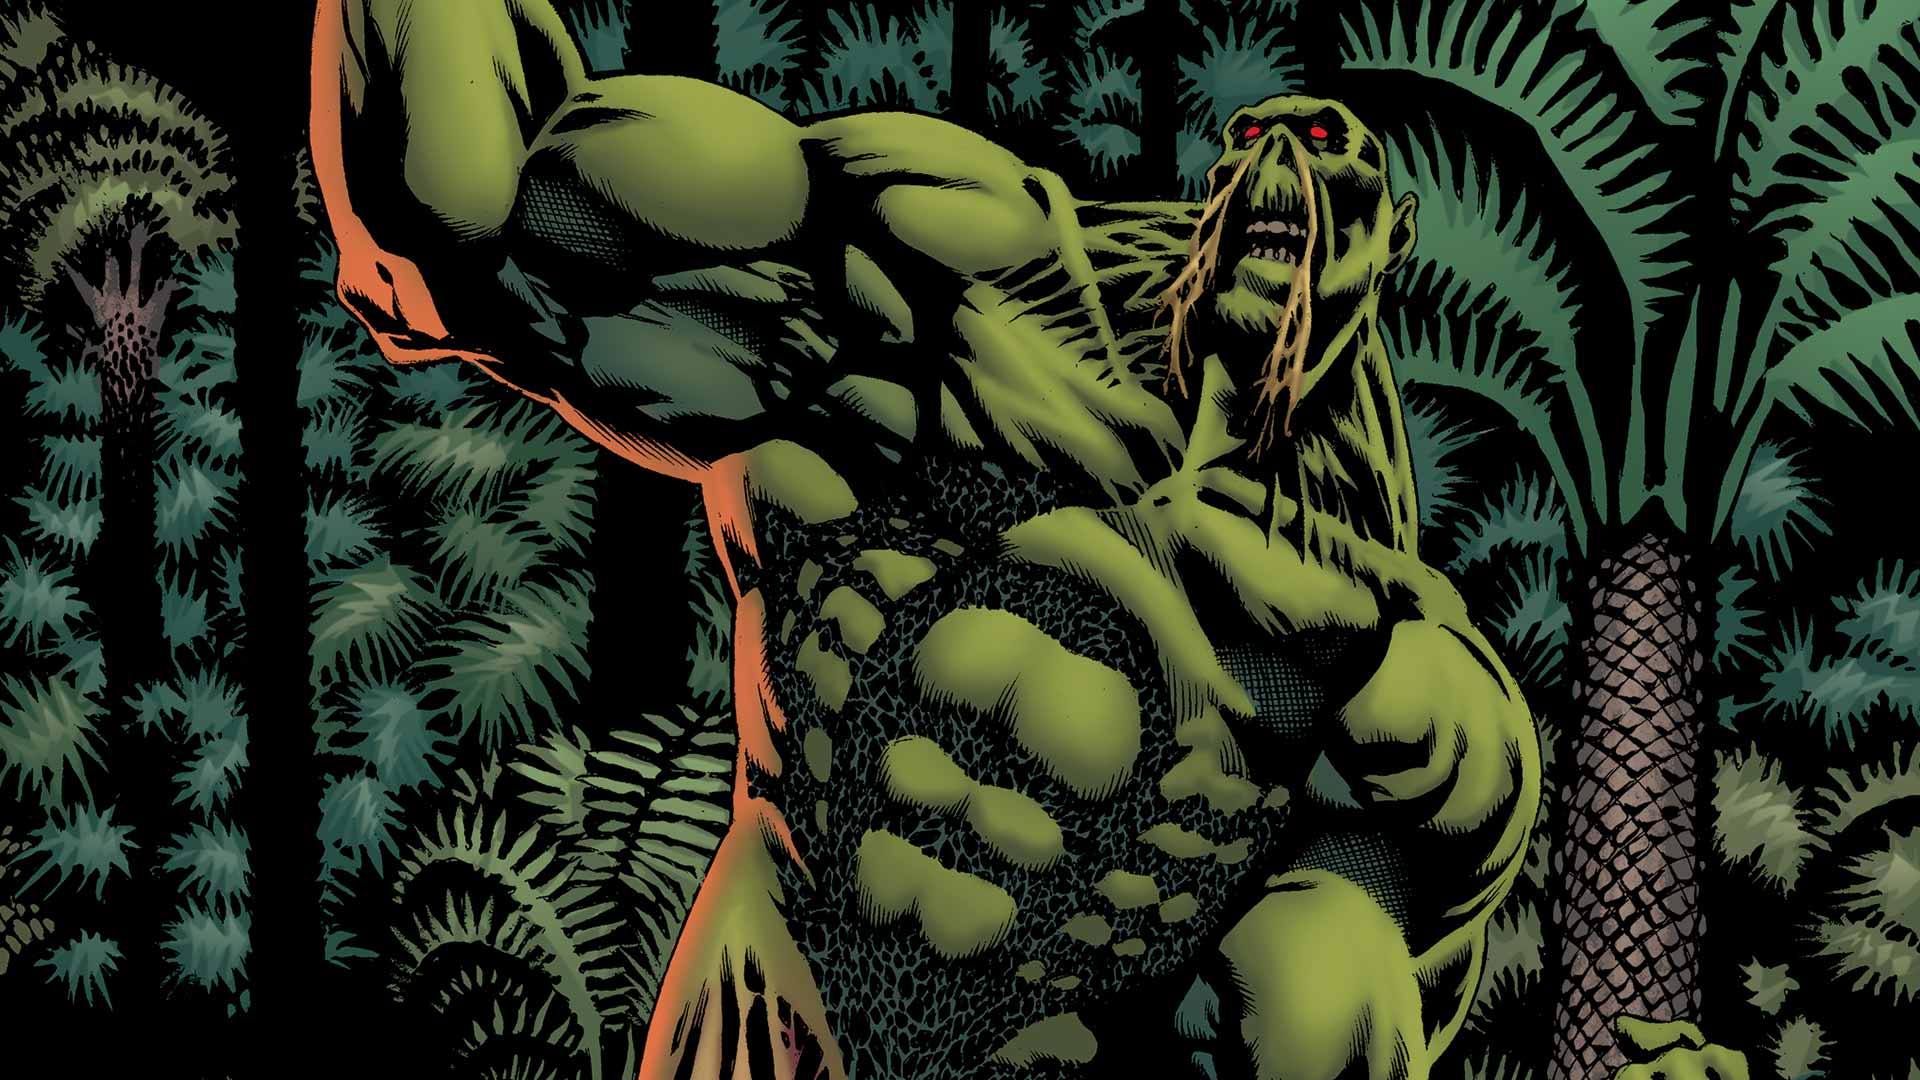 Swamp Thing' Behind The Scenes Teaser Looks Similar To